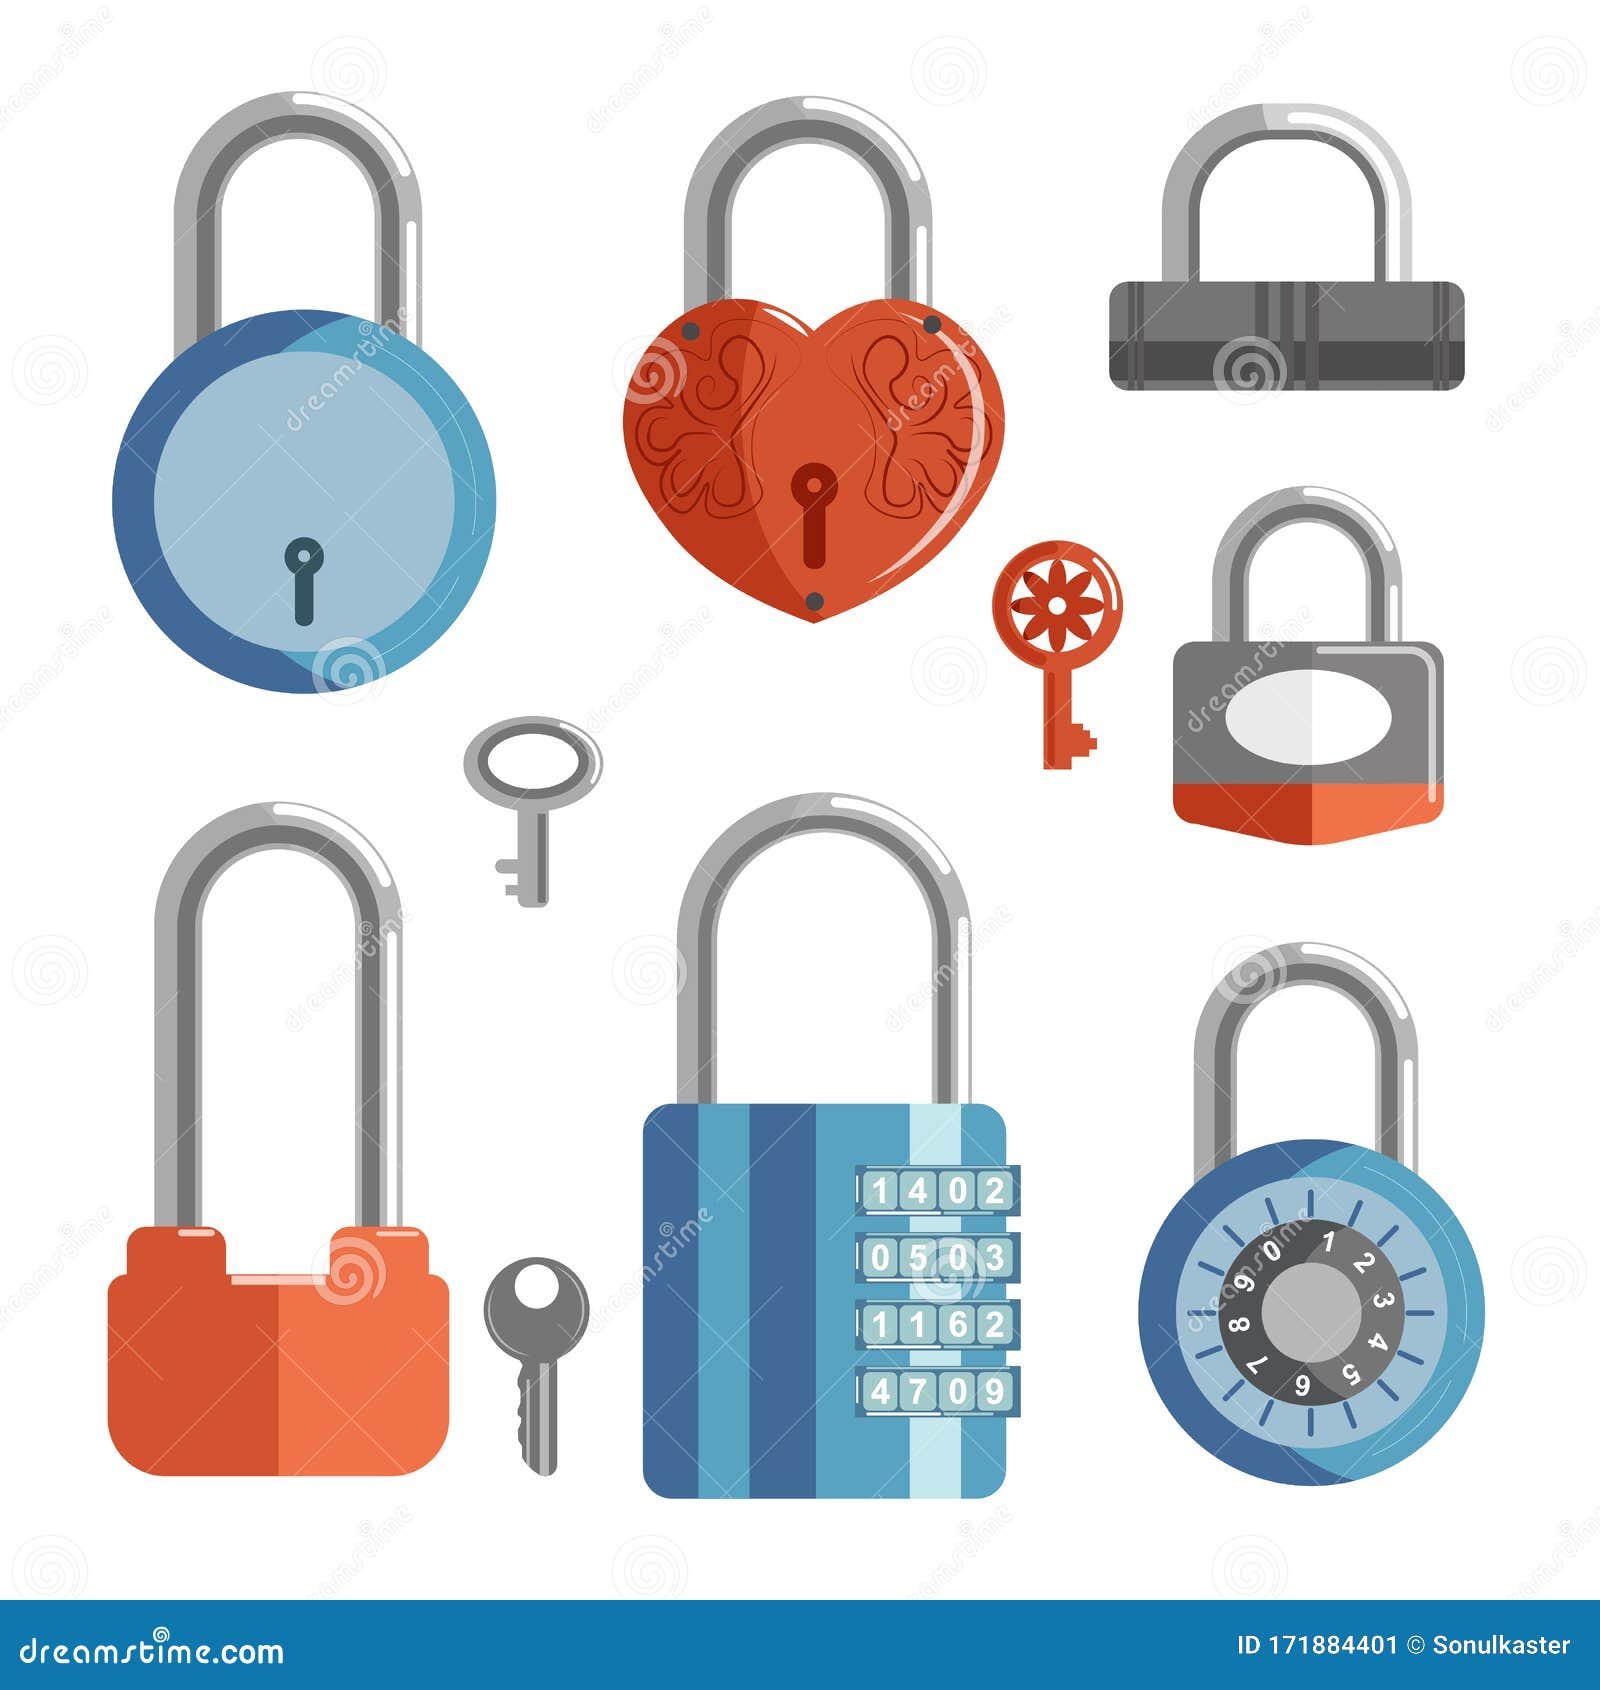 Locks with Keys and Closed Padlocks in Different Shapes Collection